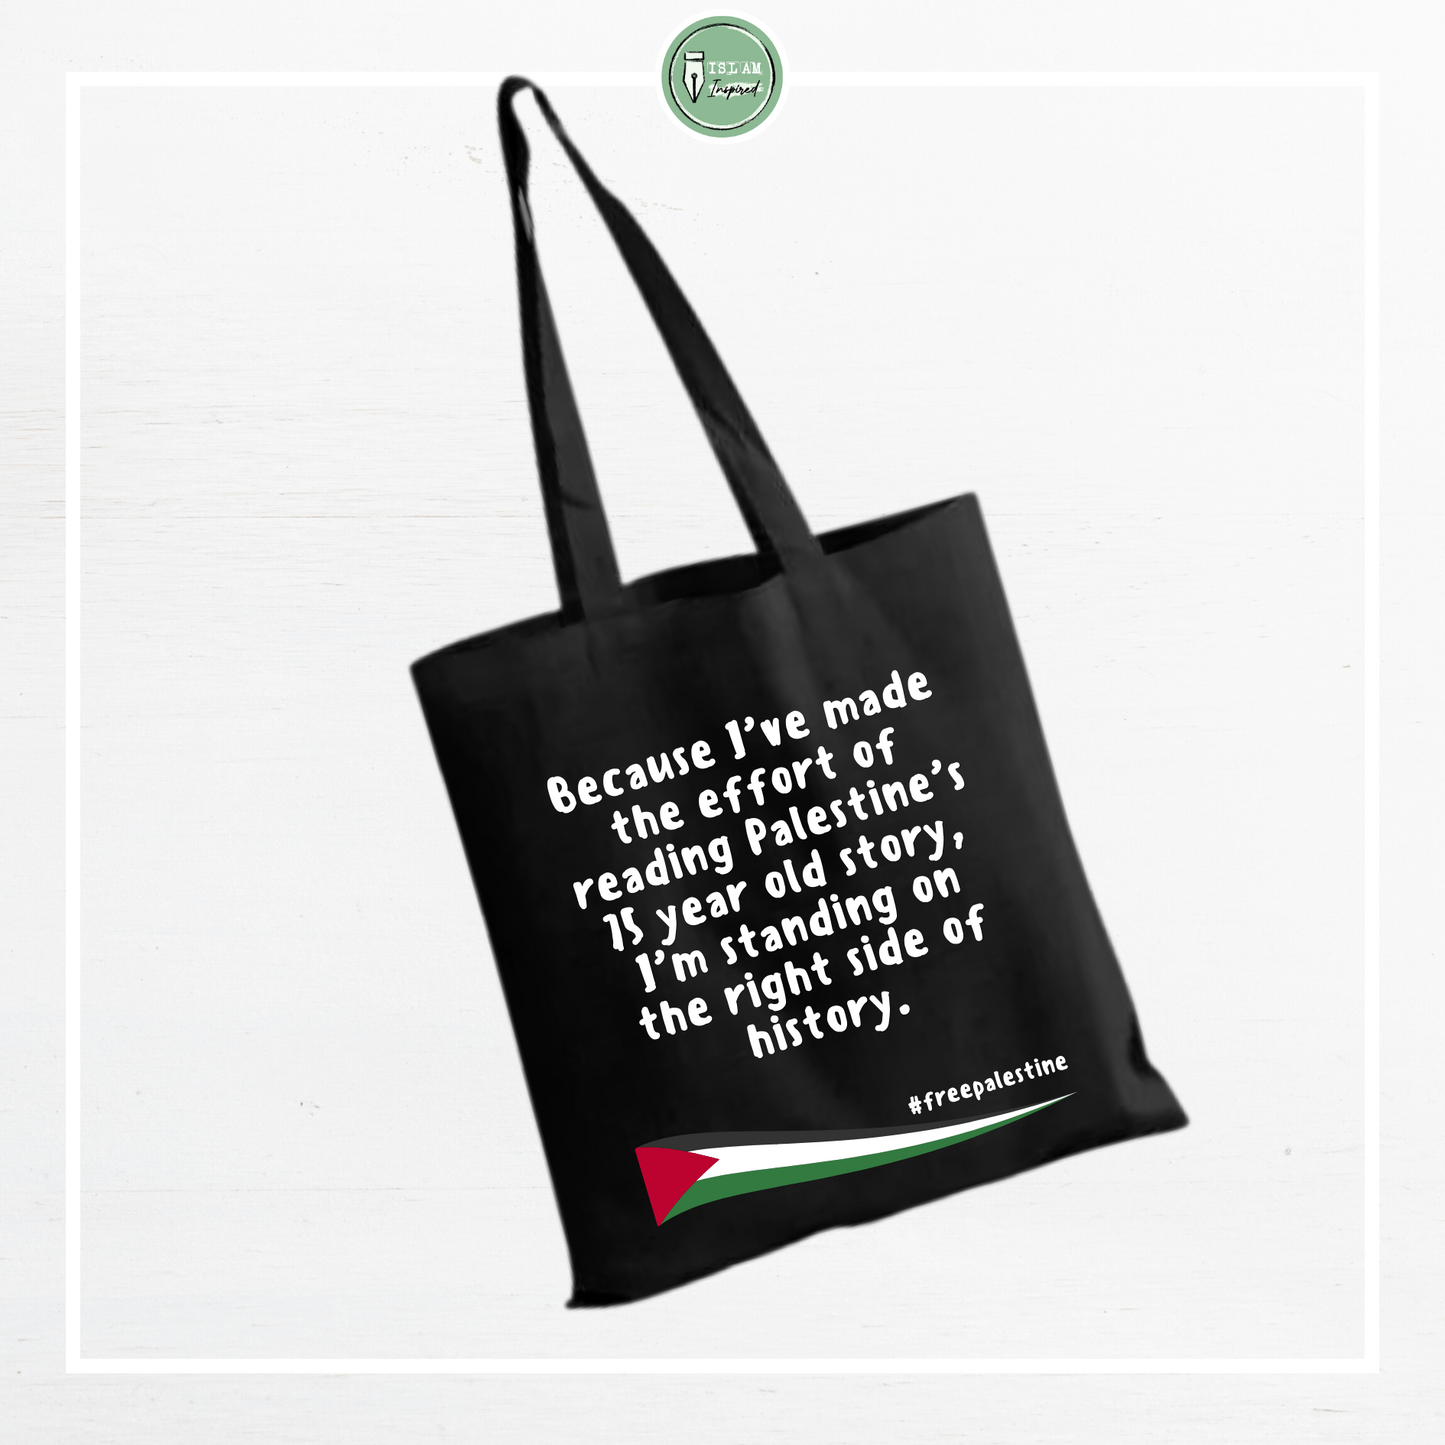 Palestina totebag 'Right side of history'